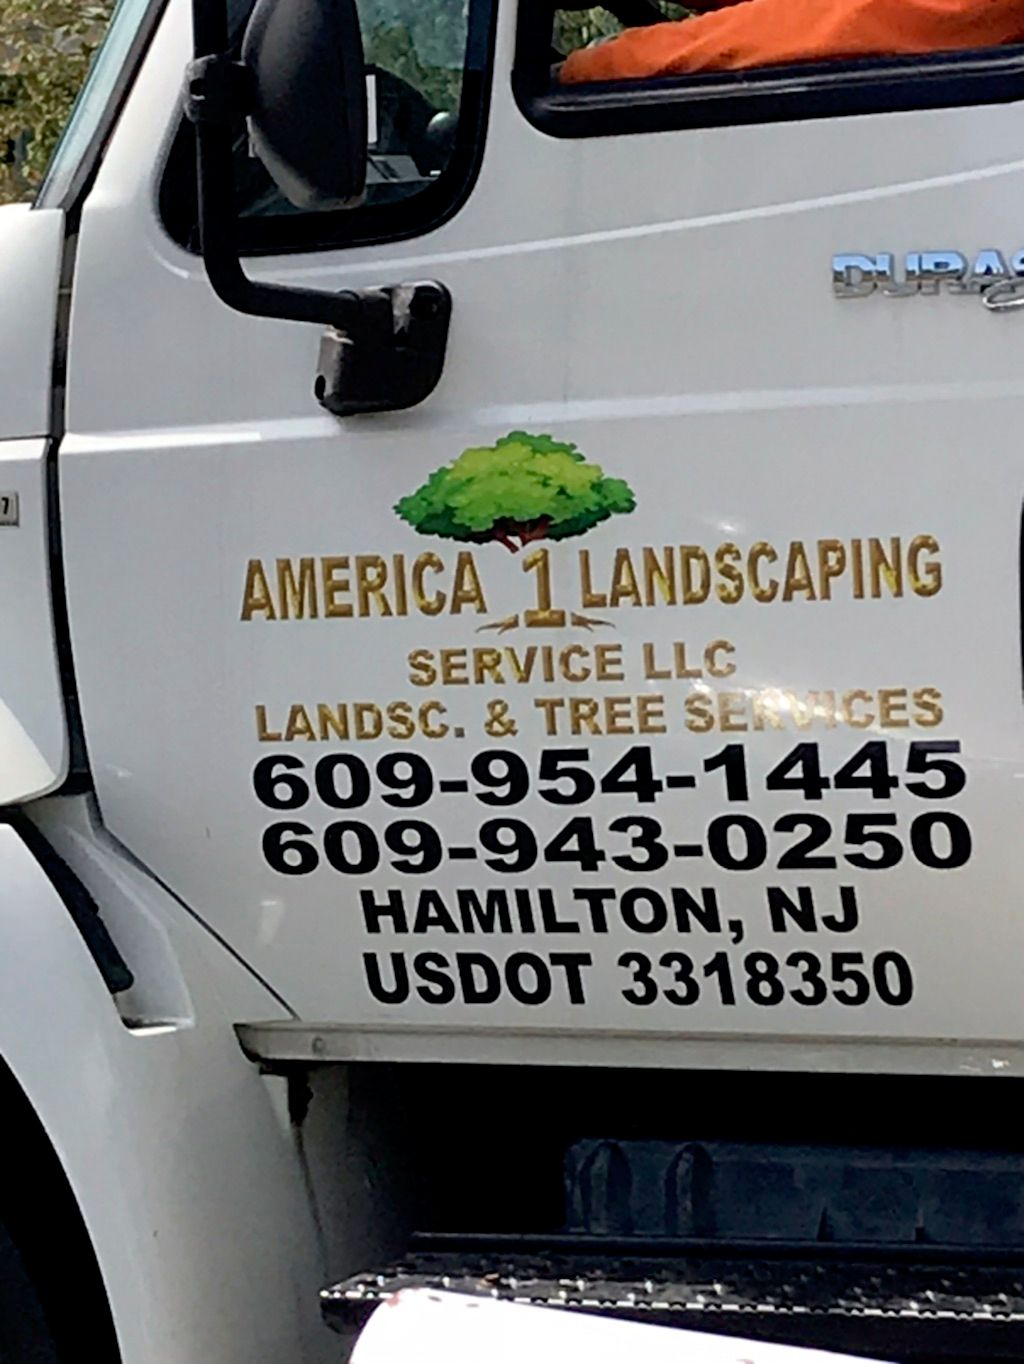 America 1 Landscaping services LLC